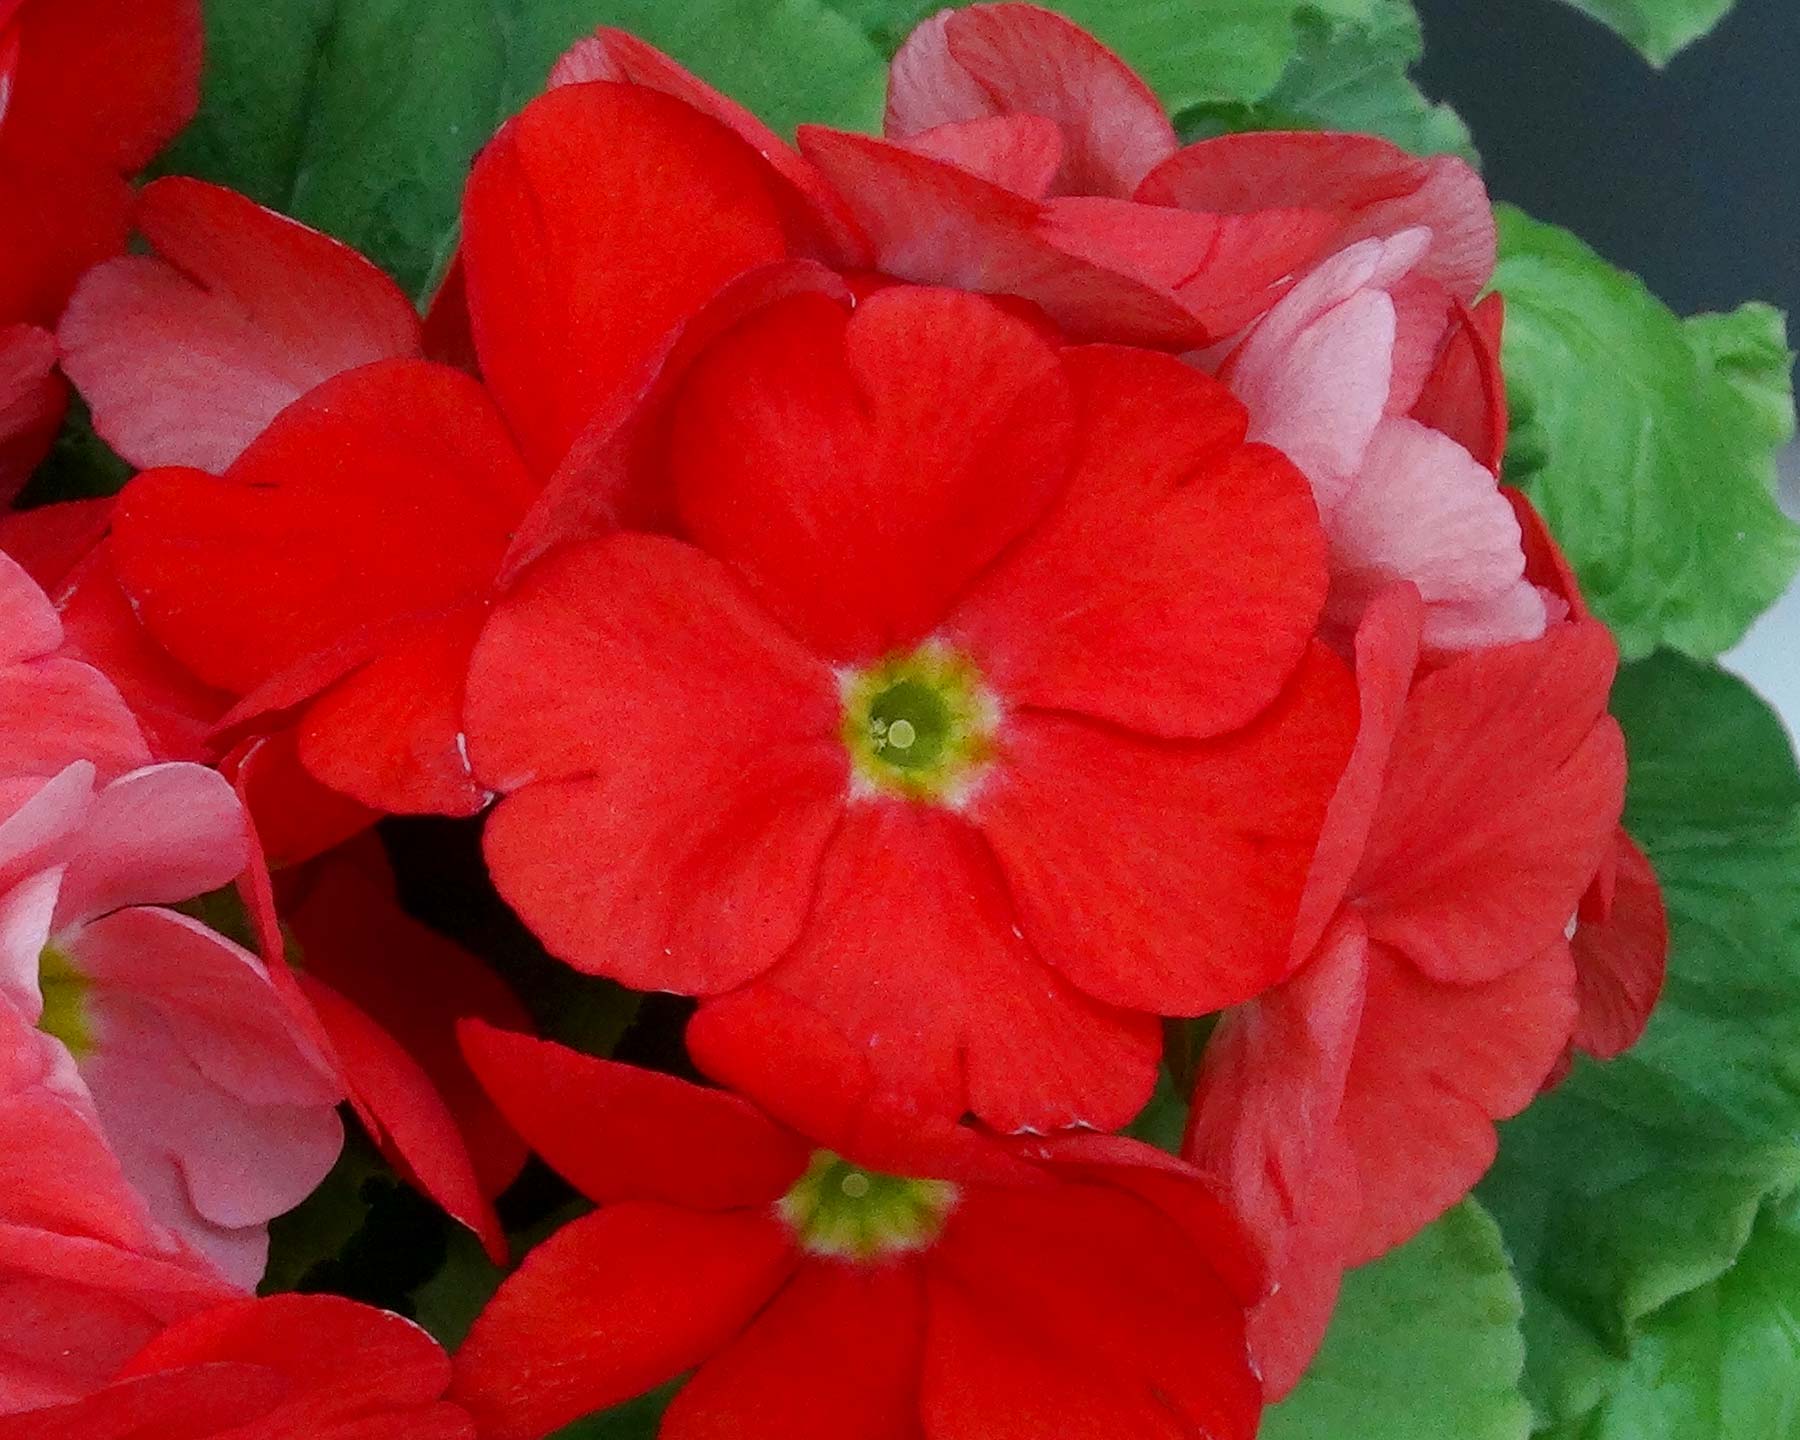 Primula obonica, this is 'Touch Me' in red